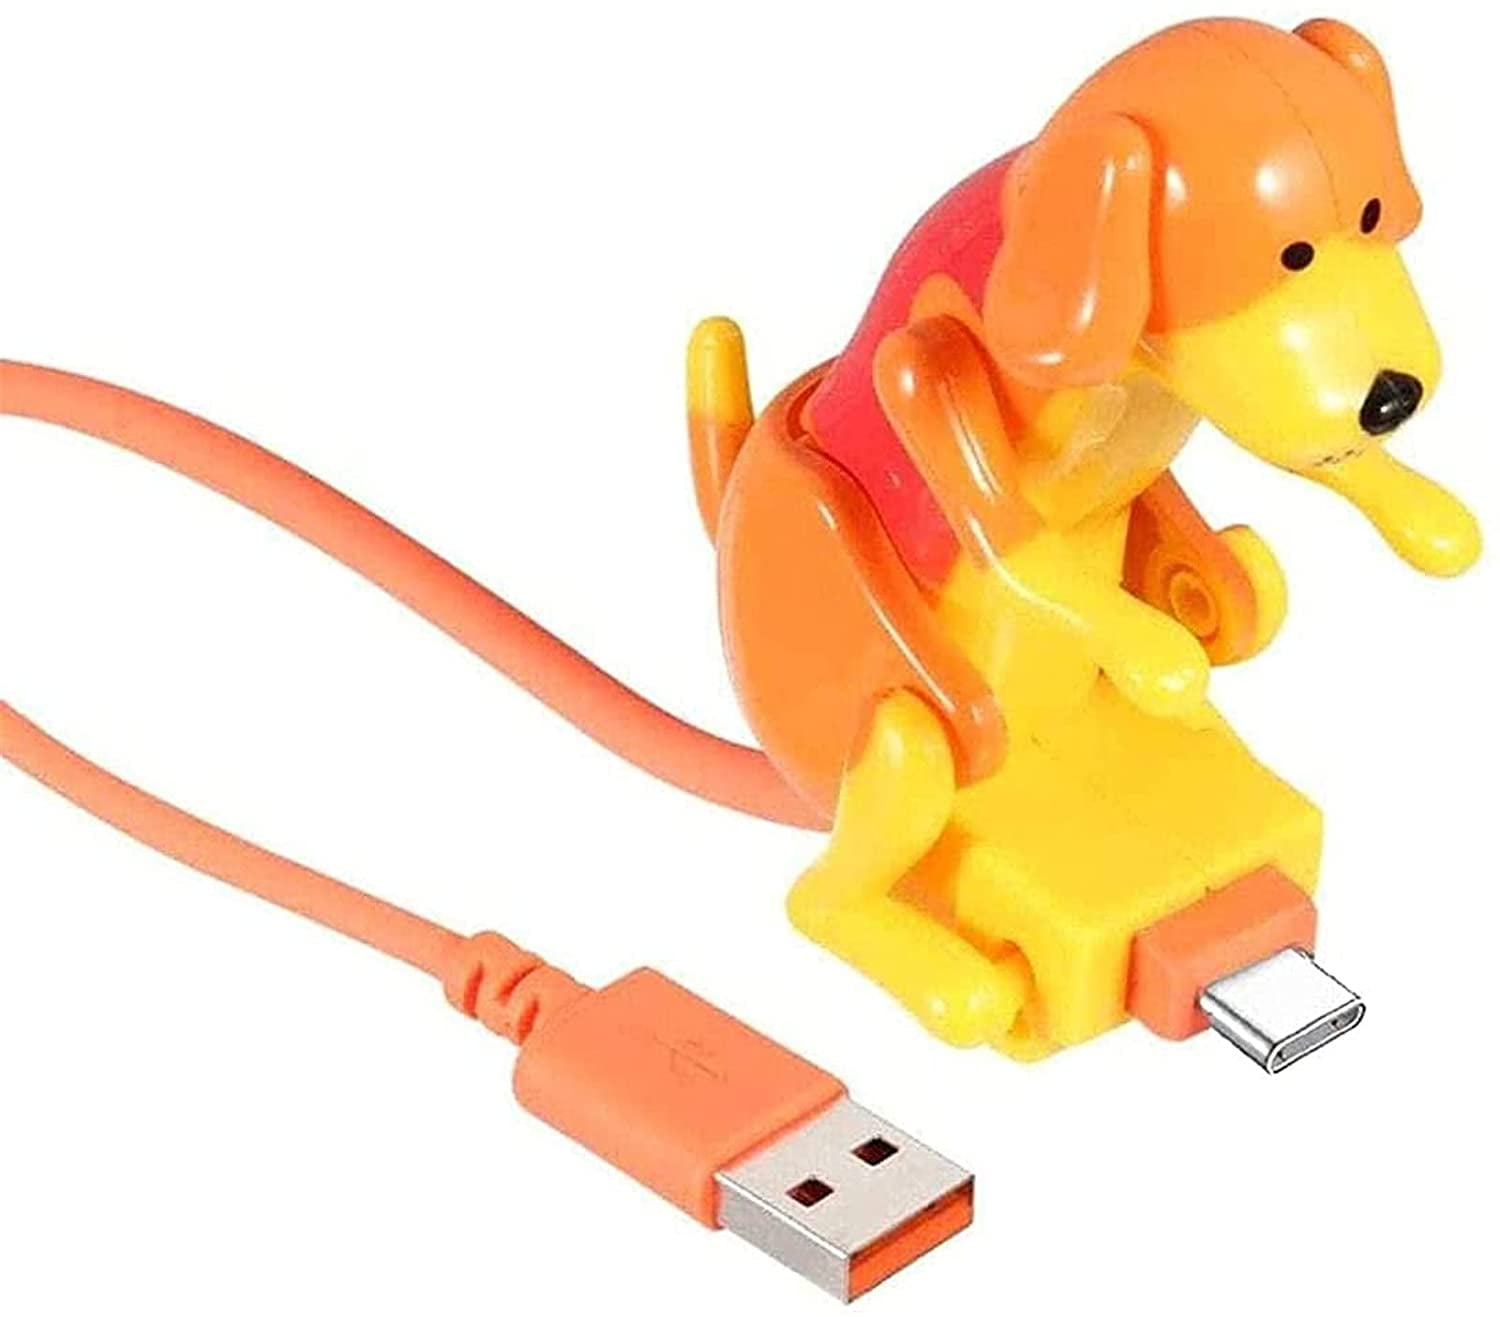 Rogue Dog Data Cable Dog Toy Smartphone USB Cable Charger,USB Phone Cable Mini Humping Spot Dog Toy Smartphone Cable Data Charging Line C White 